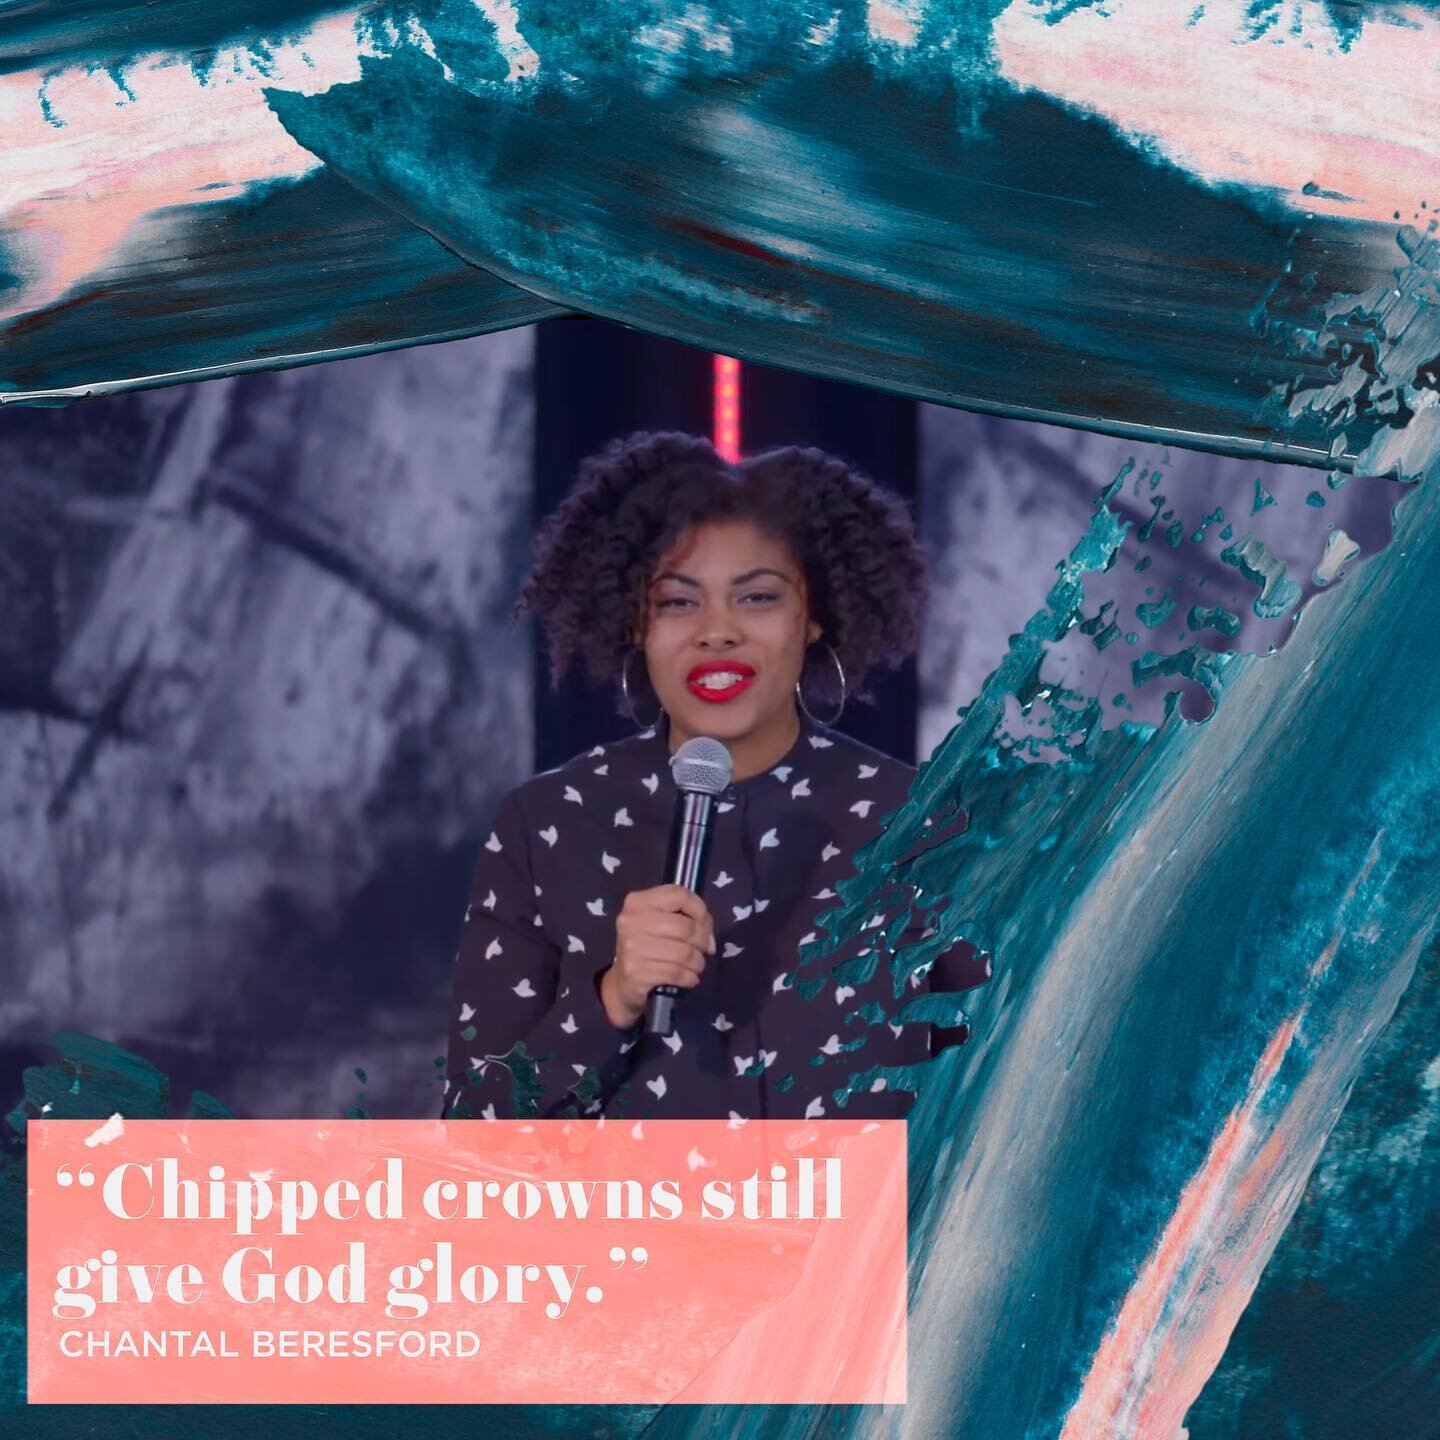 &ldquo;Chipped crowns still give God glory.&rdquo; 

What beautiful and hopeful words from Chantal Beresford! We&rsquo;re praying they encourage you today. No matter what you&rsquo;ve been through, or what you&rsquo;ve done, your story matters and ca